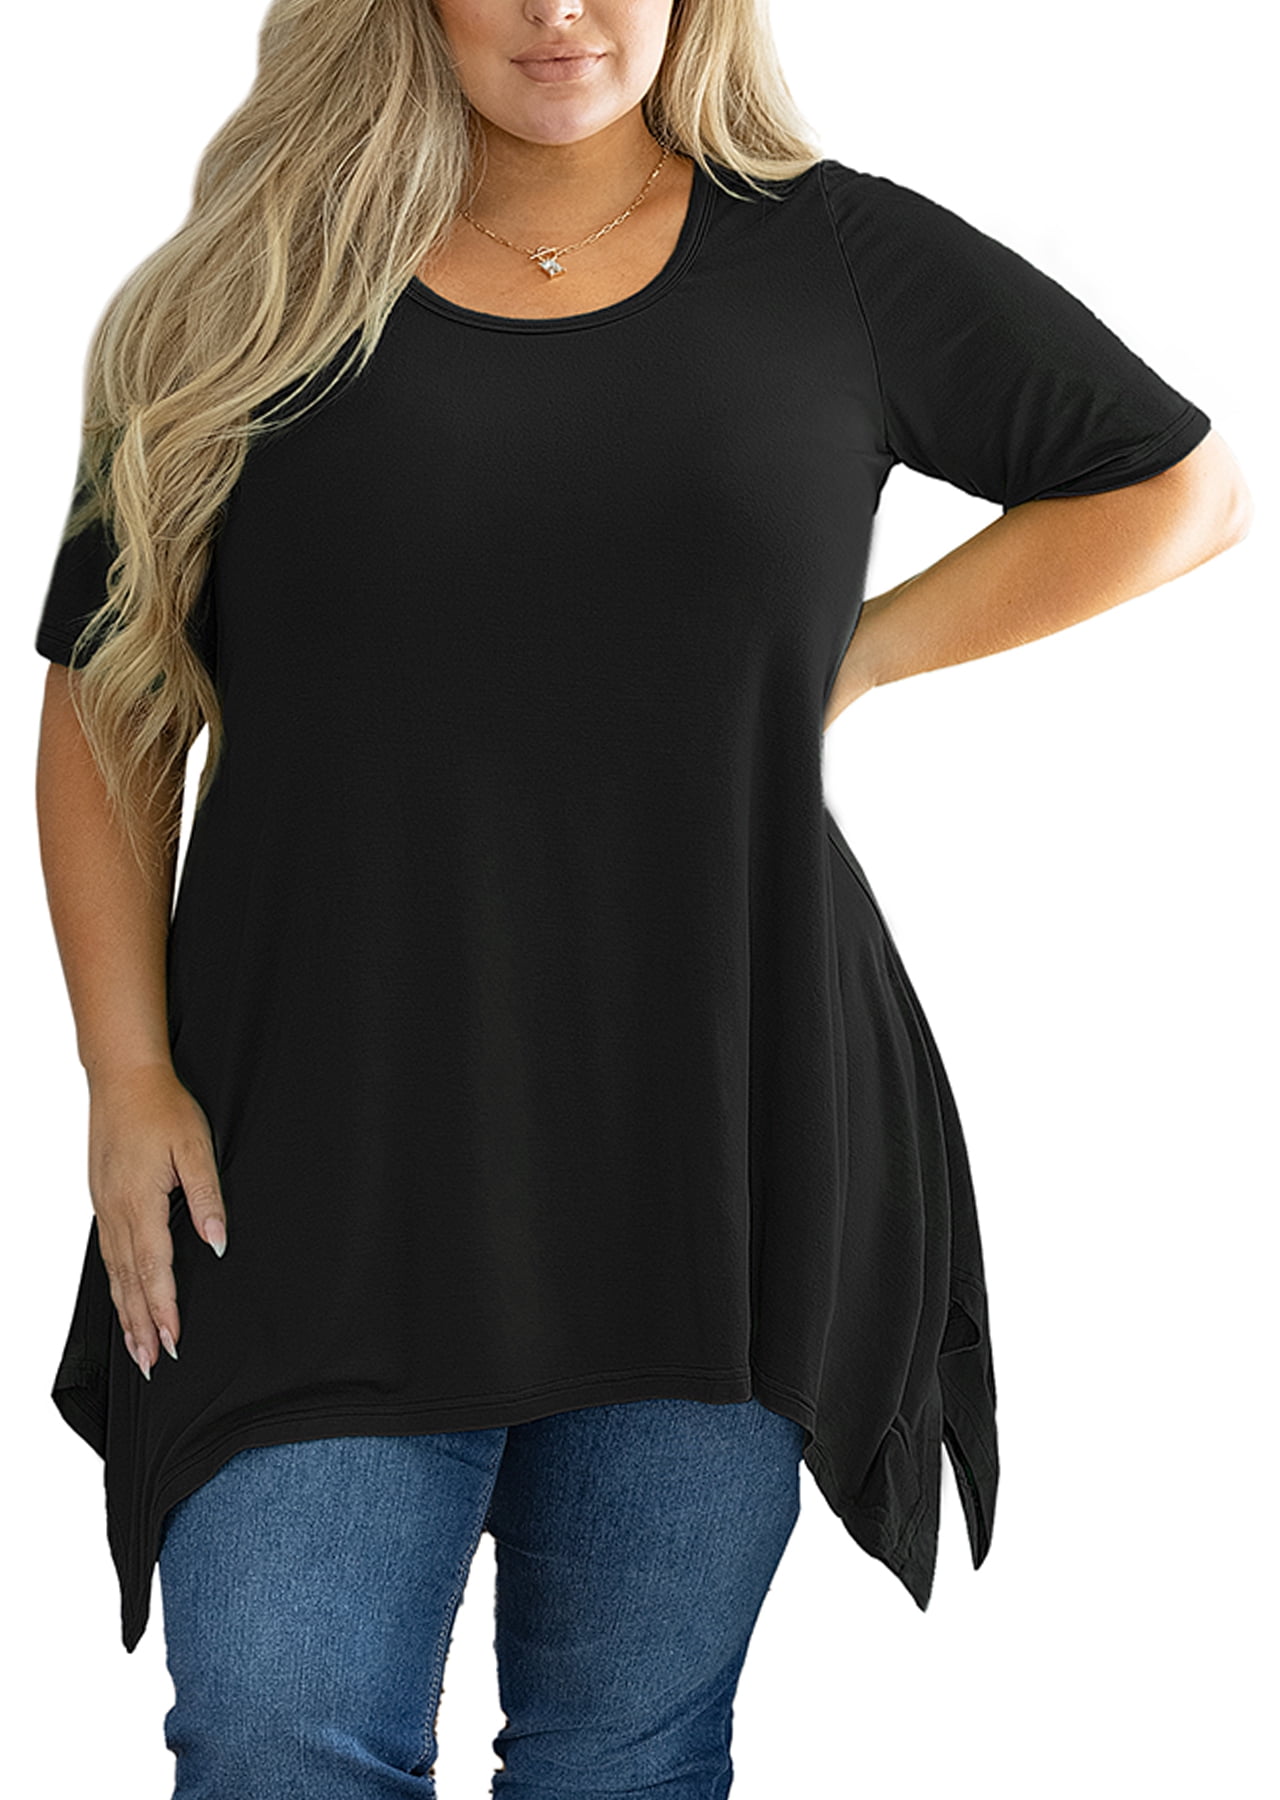 SHOWMALL Plus Size Tops for Women Tunic Clothes Short Sleeve Black Blouse  4X Summer Swing Tee Crewneck Clothing Flowy Shirt for Leggings